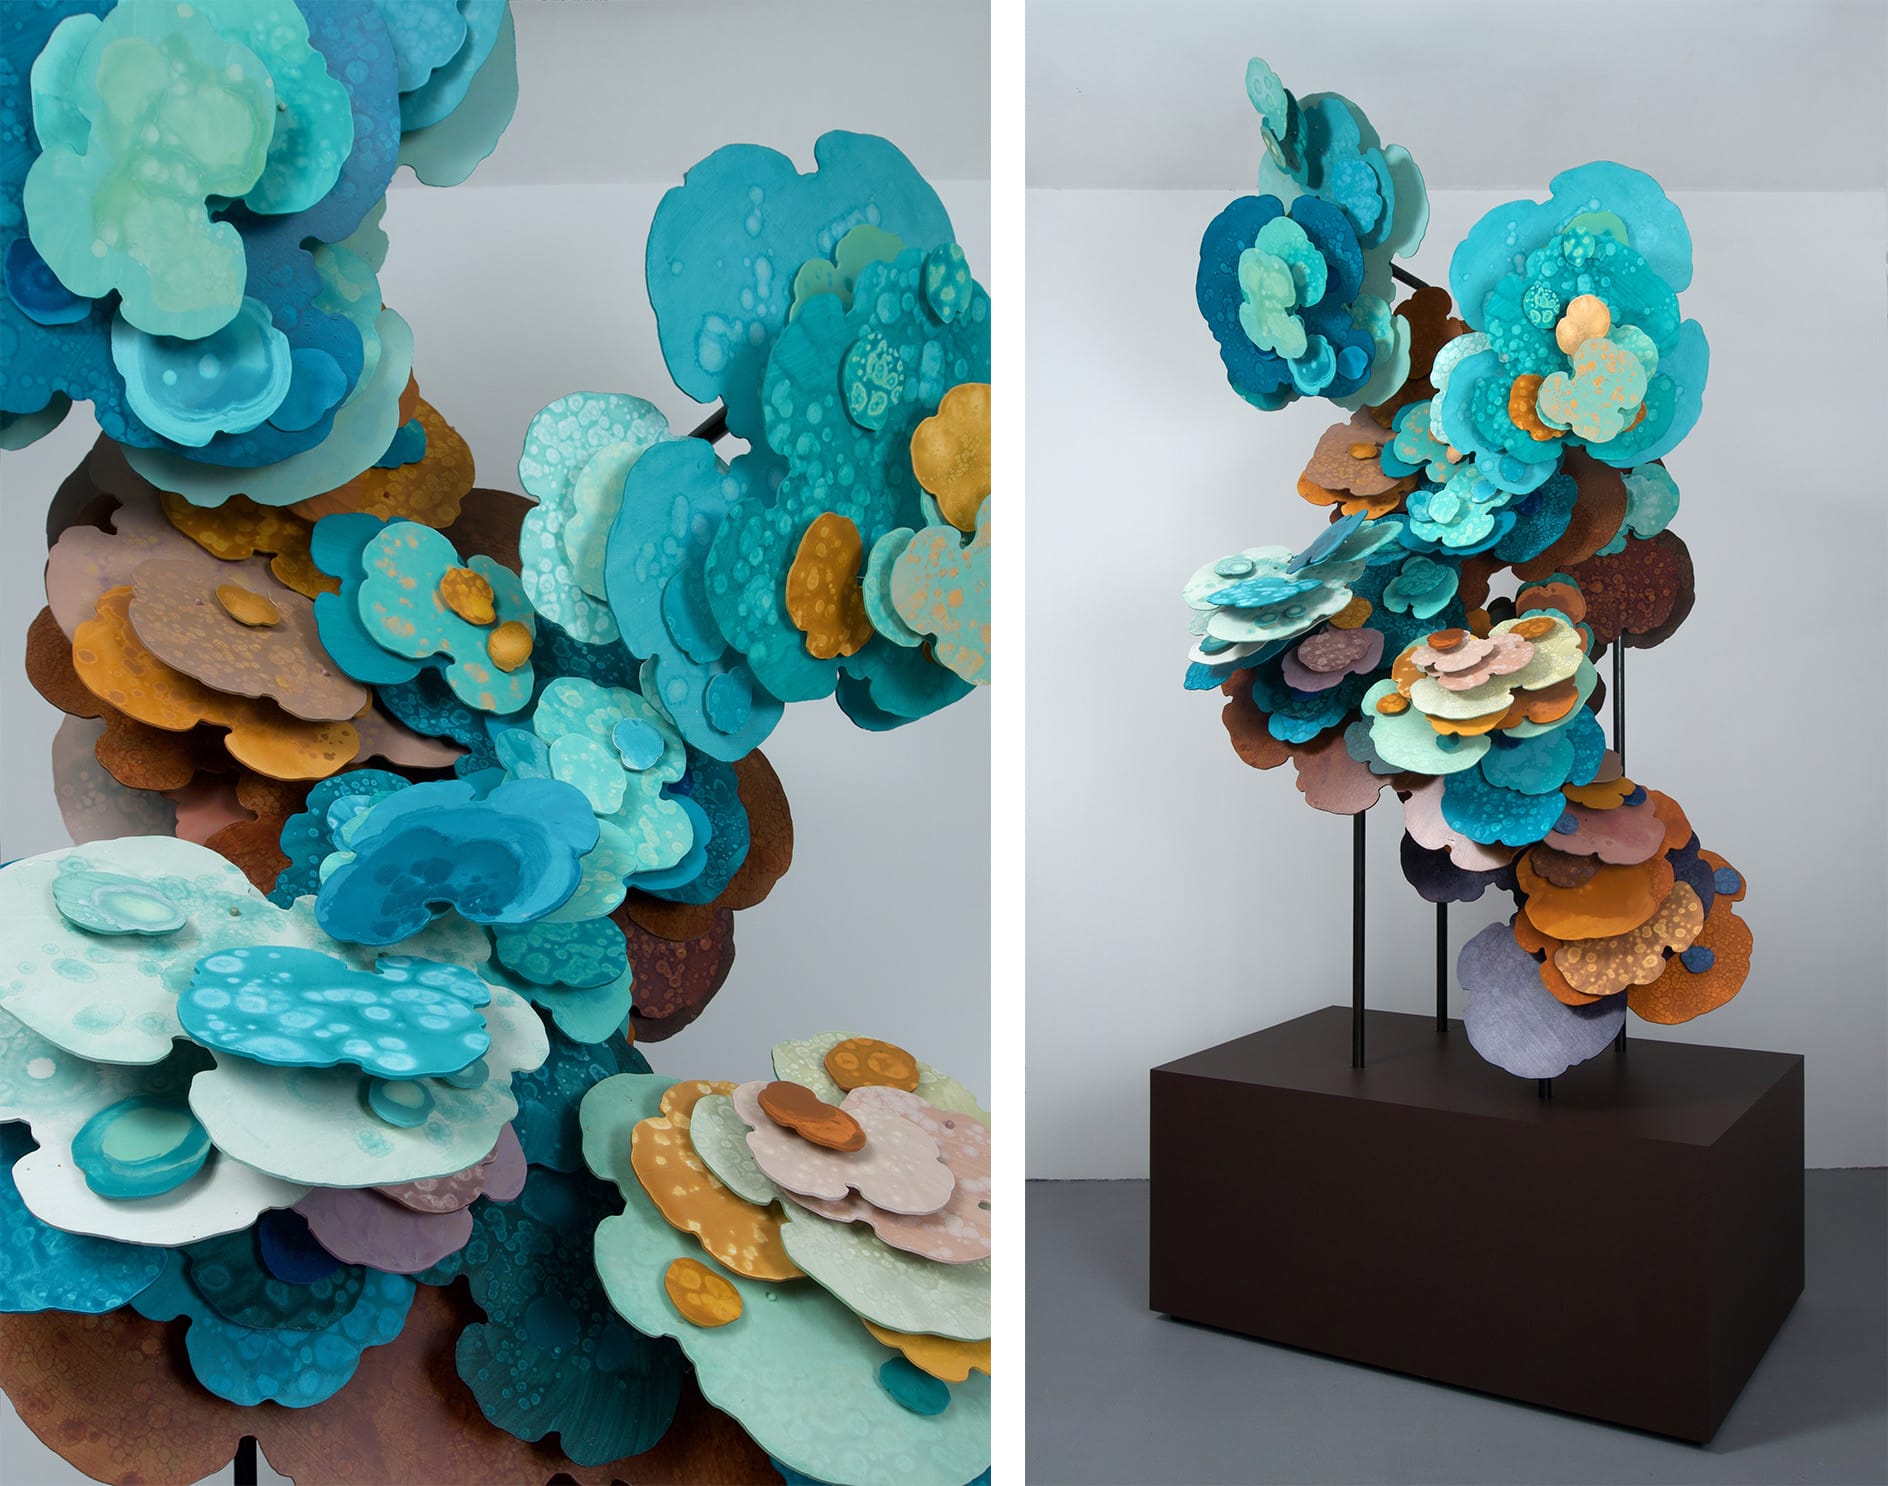 two images side-by-side of the same sculpture, the right side showing an overview of a teal and brown abstract sculpture that resembles florals or lichen, and the left side showing a detail of the petal-like shapes